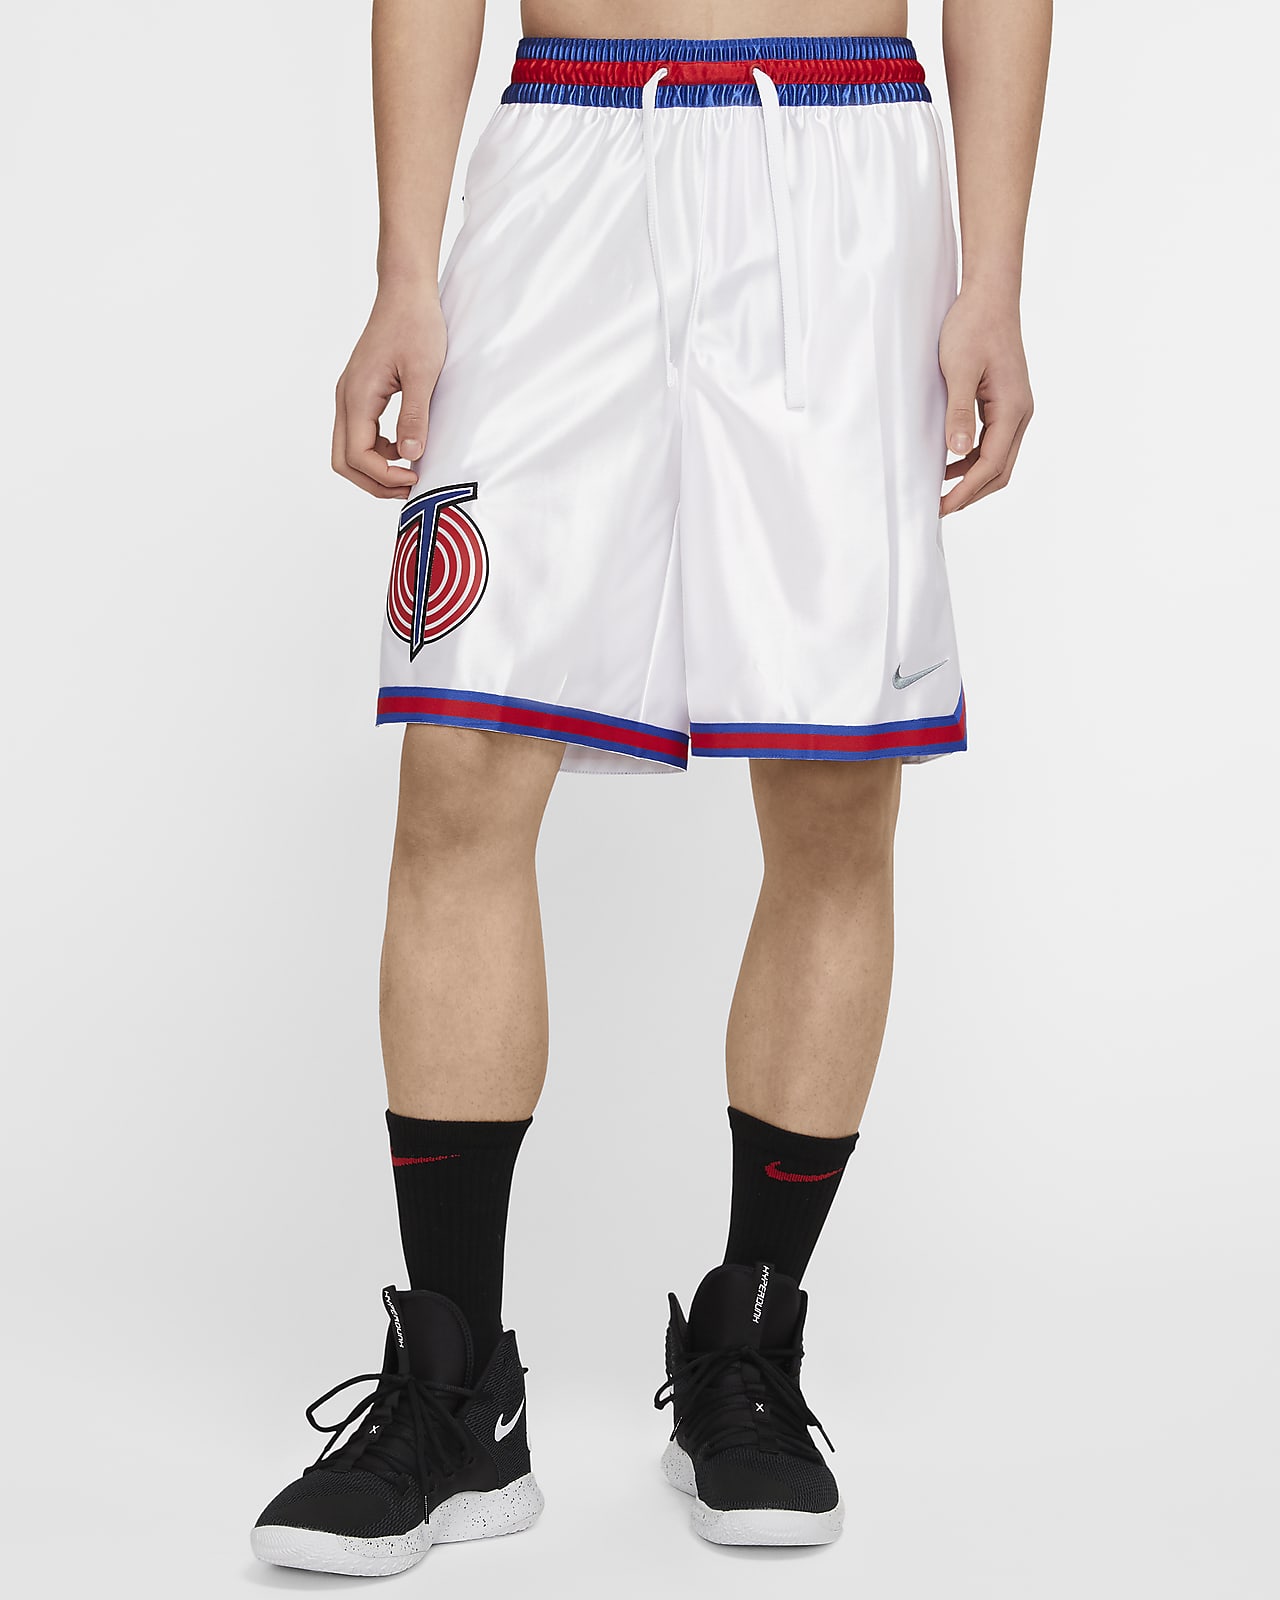 Nike Space Jam Tune Squad Jersey and Shorts | sneakersclubsg